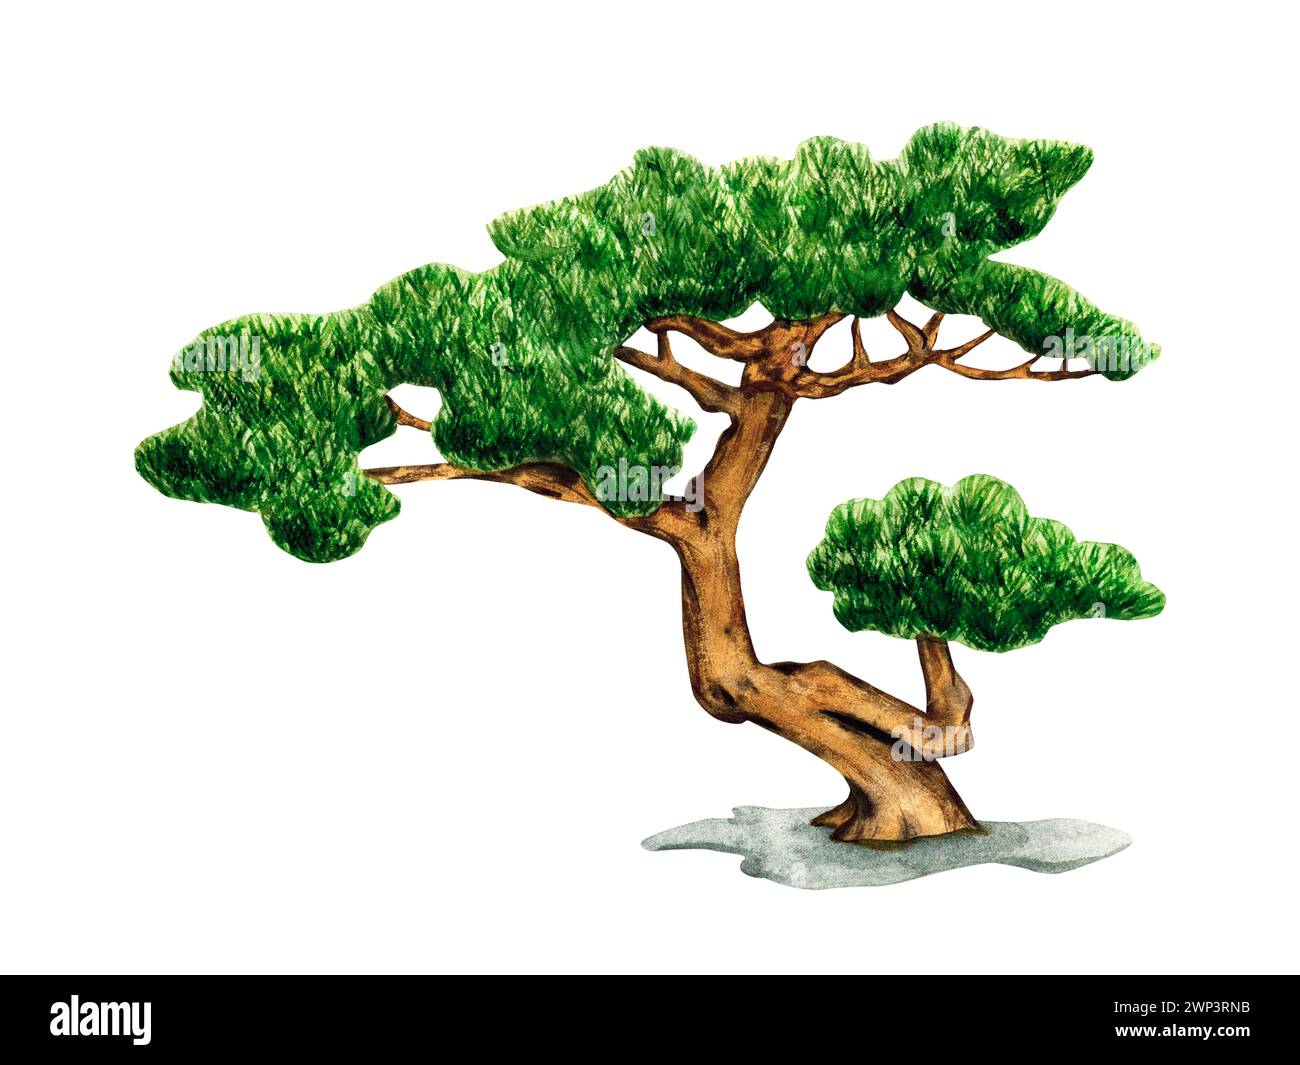 Bonsai tree of Pine isolated on a white background. Small green Bonsai Tree watercolor illustration. Traditional Japanese Miniature tree. Nature art Stock Photo